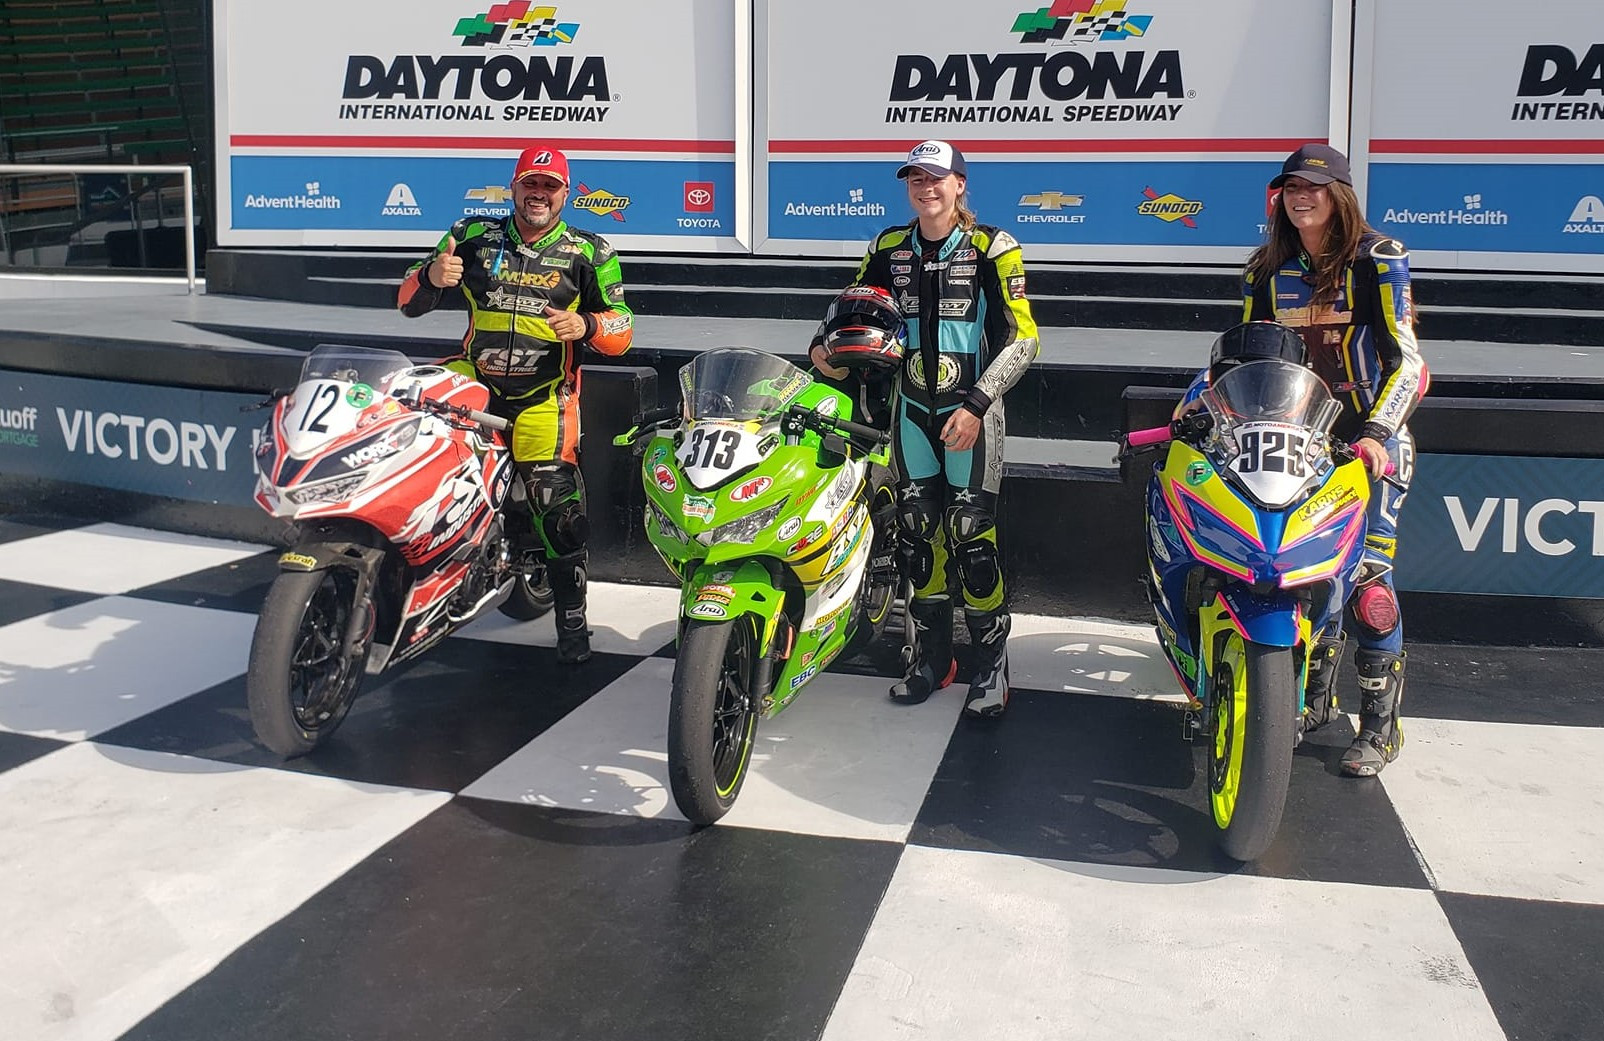 Trenton Keesee (center) after winning the ASRA 400 National at Daytona over runner-up Alex Ferreira (left) and third-place finisher Elisa Gendron-Belen (right). Photo courtesy Bruce Gendron.